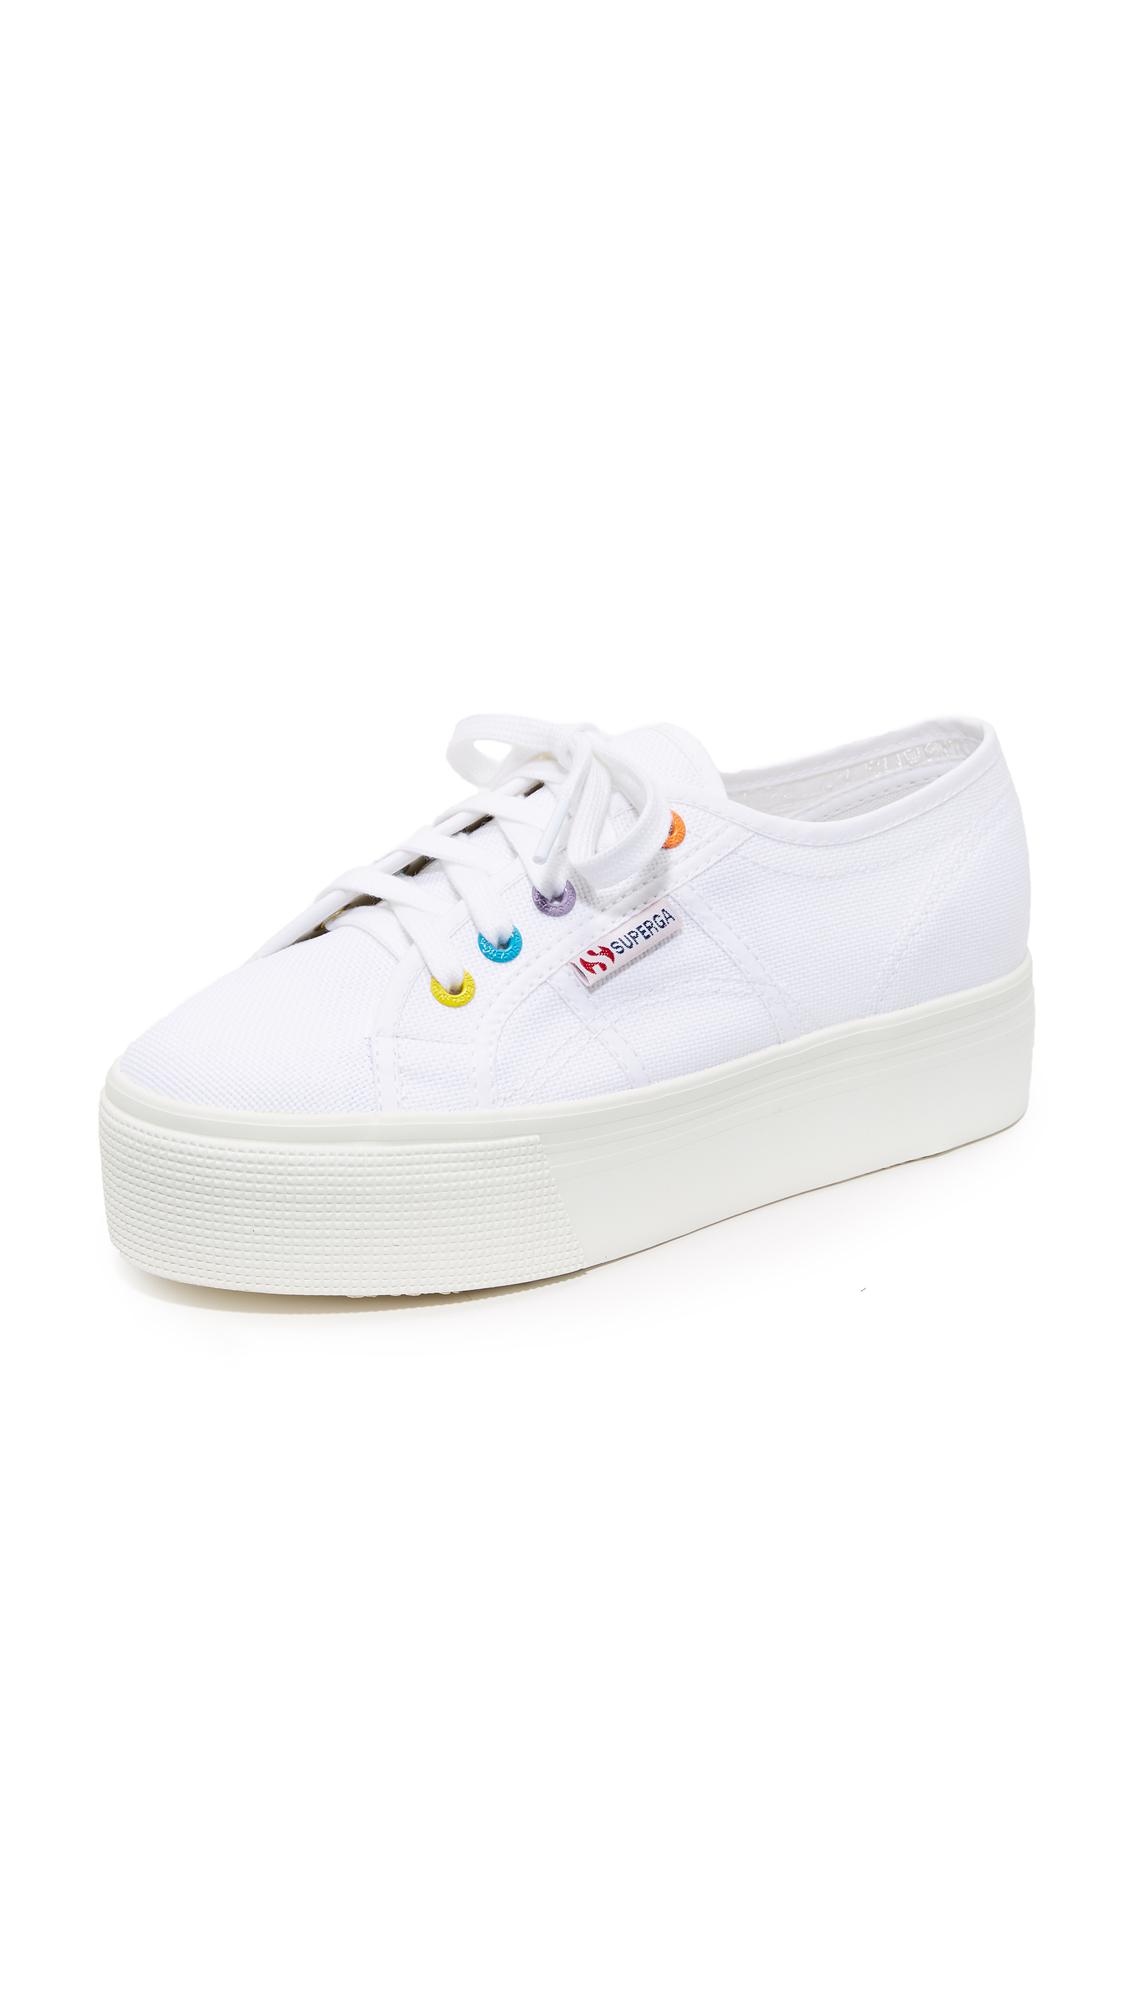 Lyst - Superga 2790 Platform Cotw Eyelet Classic Sneakers in White